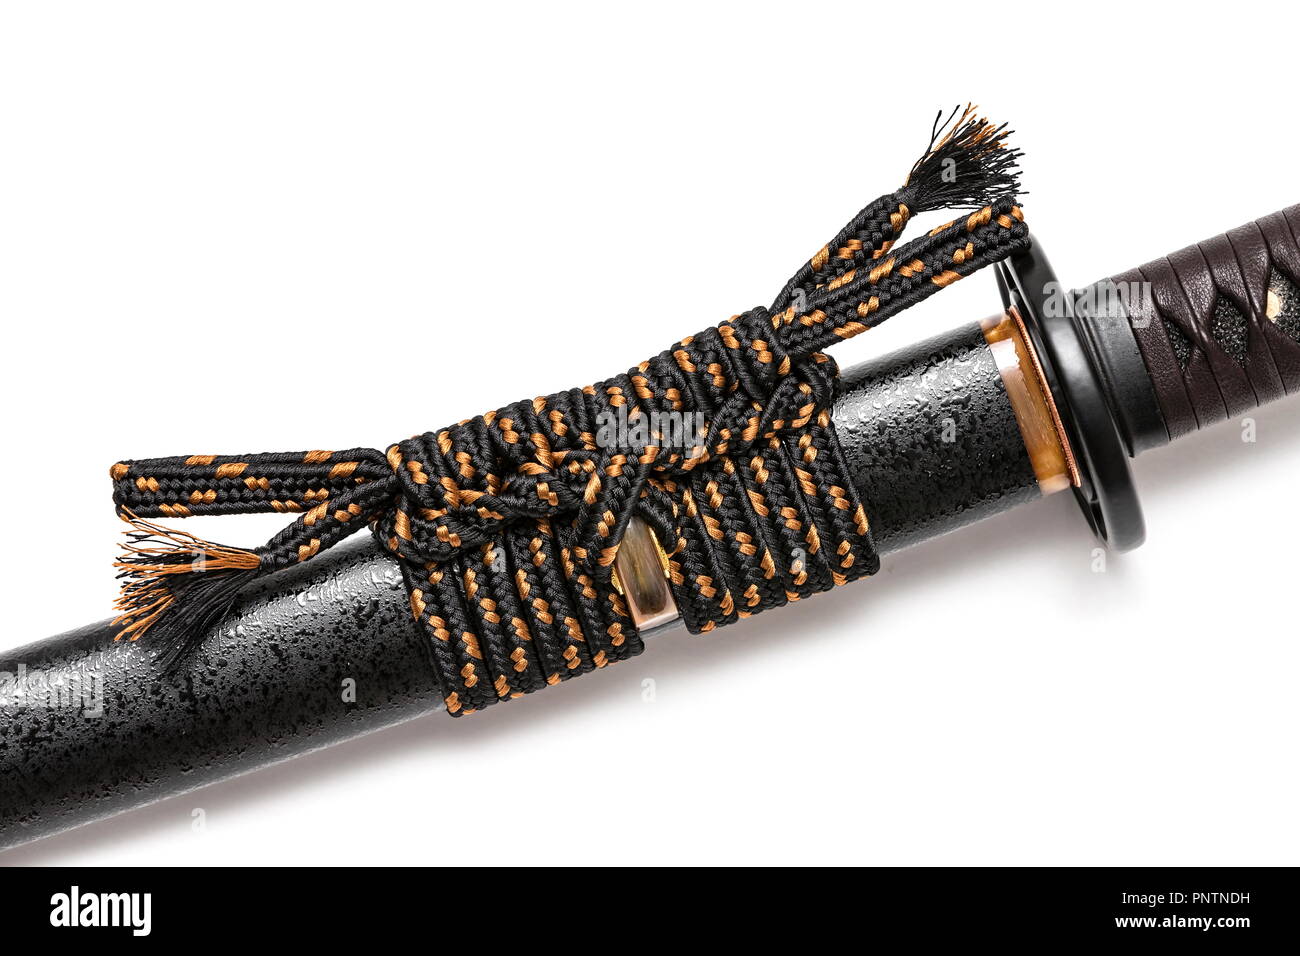 Sageo cord for tie the scabbard of Japanese sword isolated in white background. Stock Photo